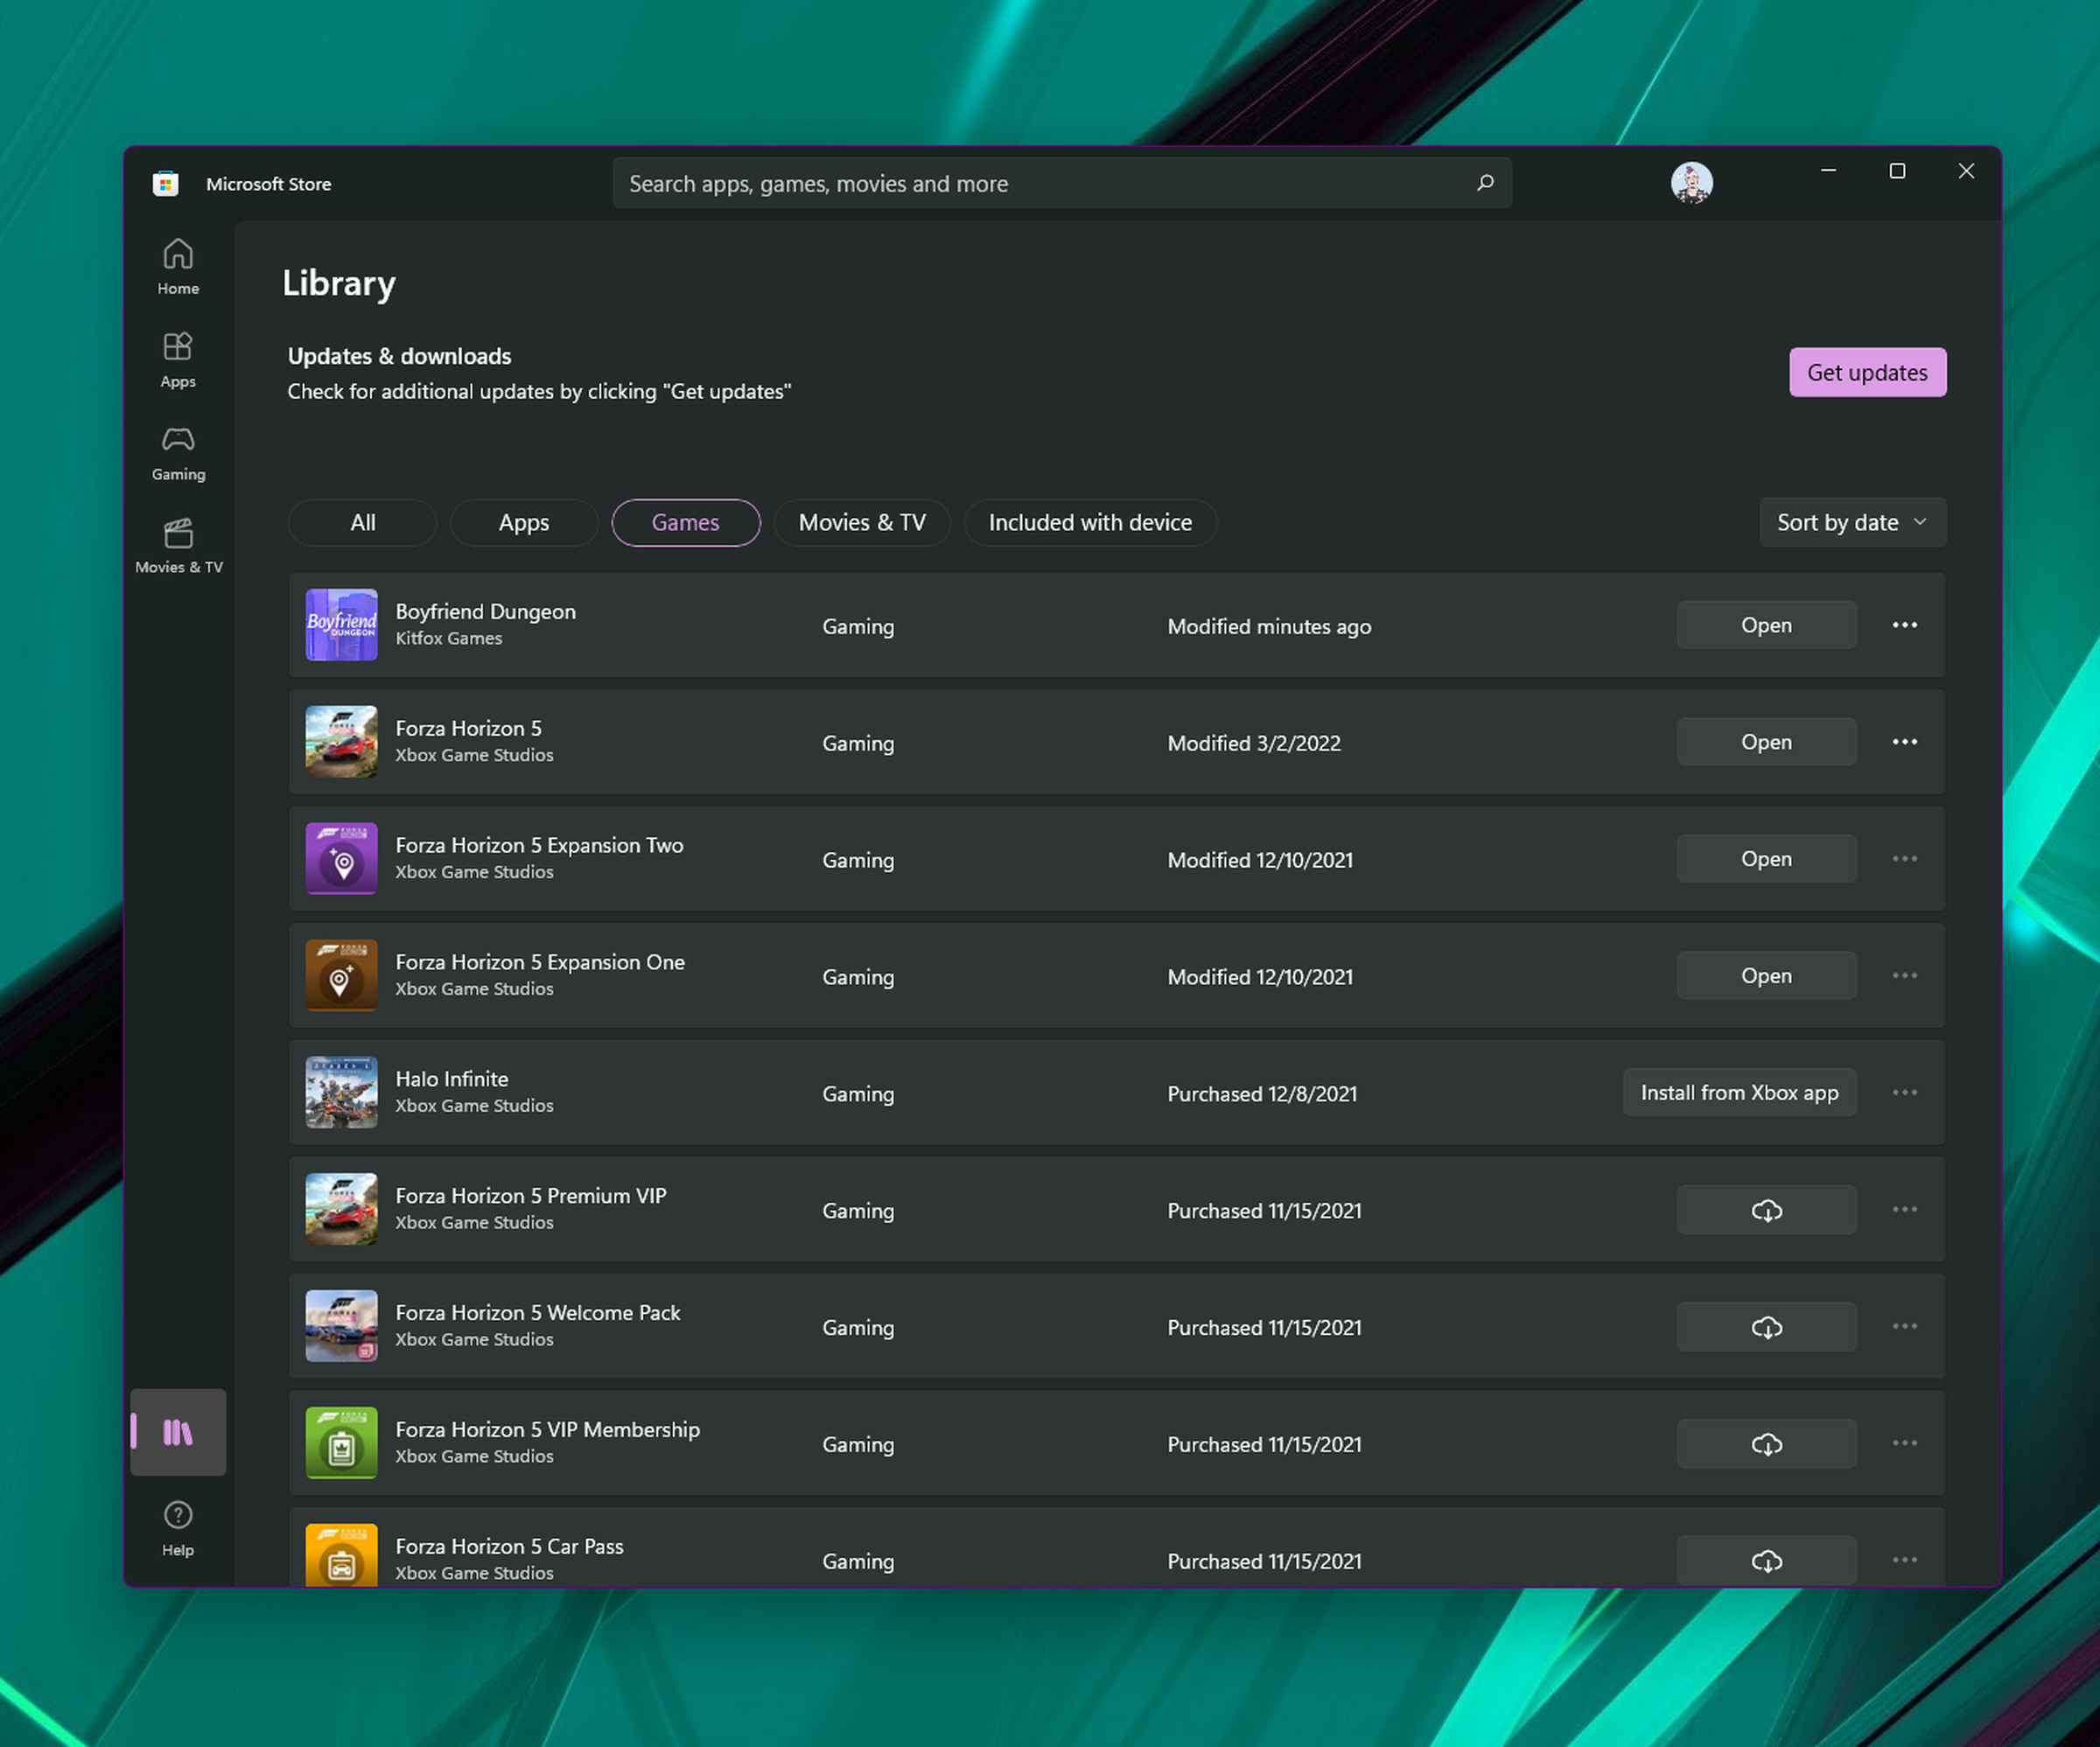 “My Library” shows you a list of all your apps and can sort your purchased or GamePass titles